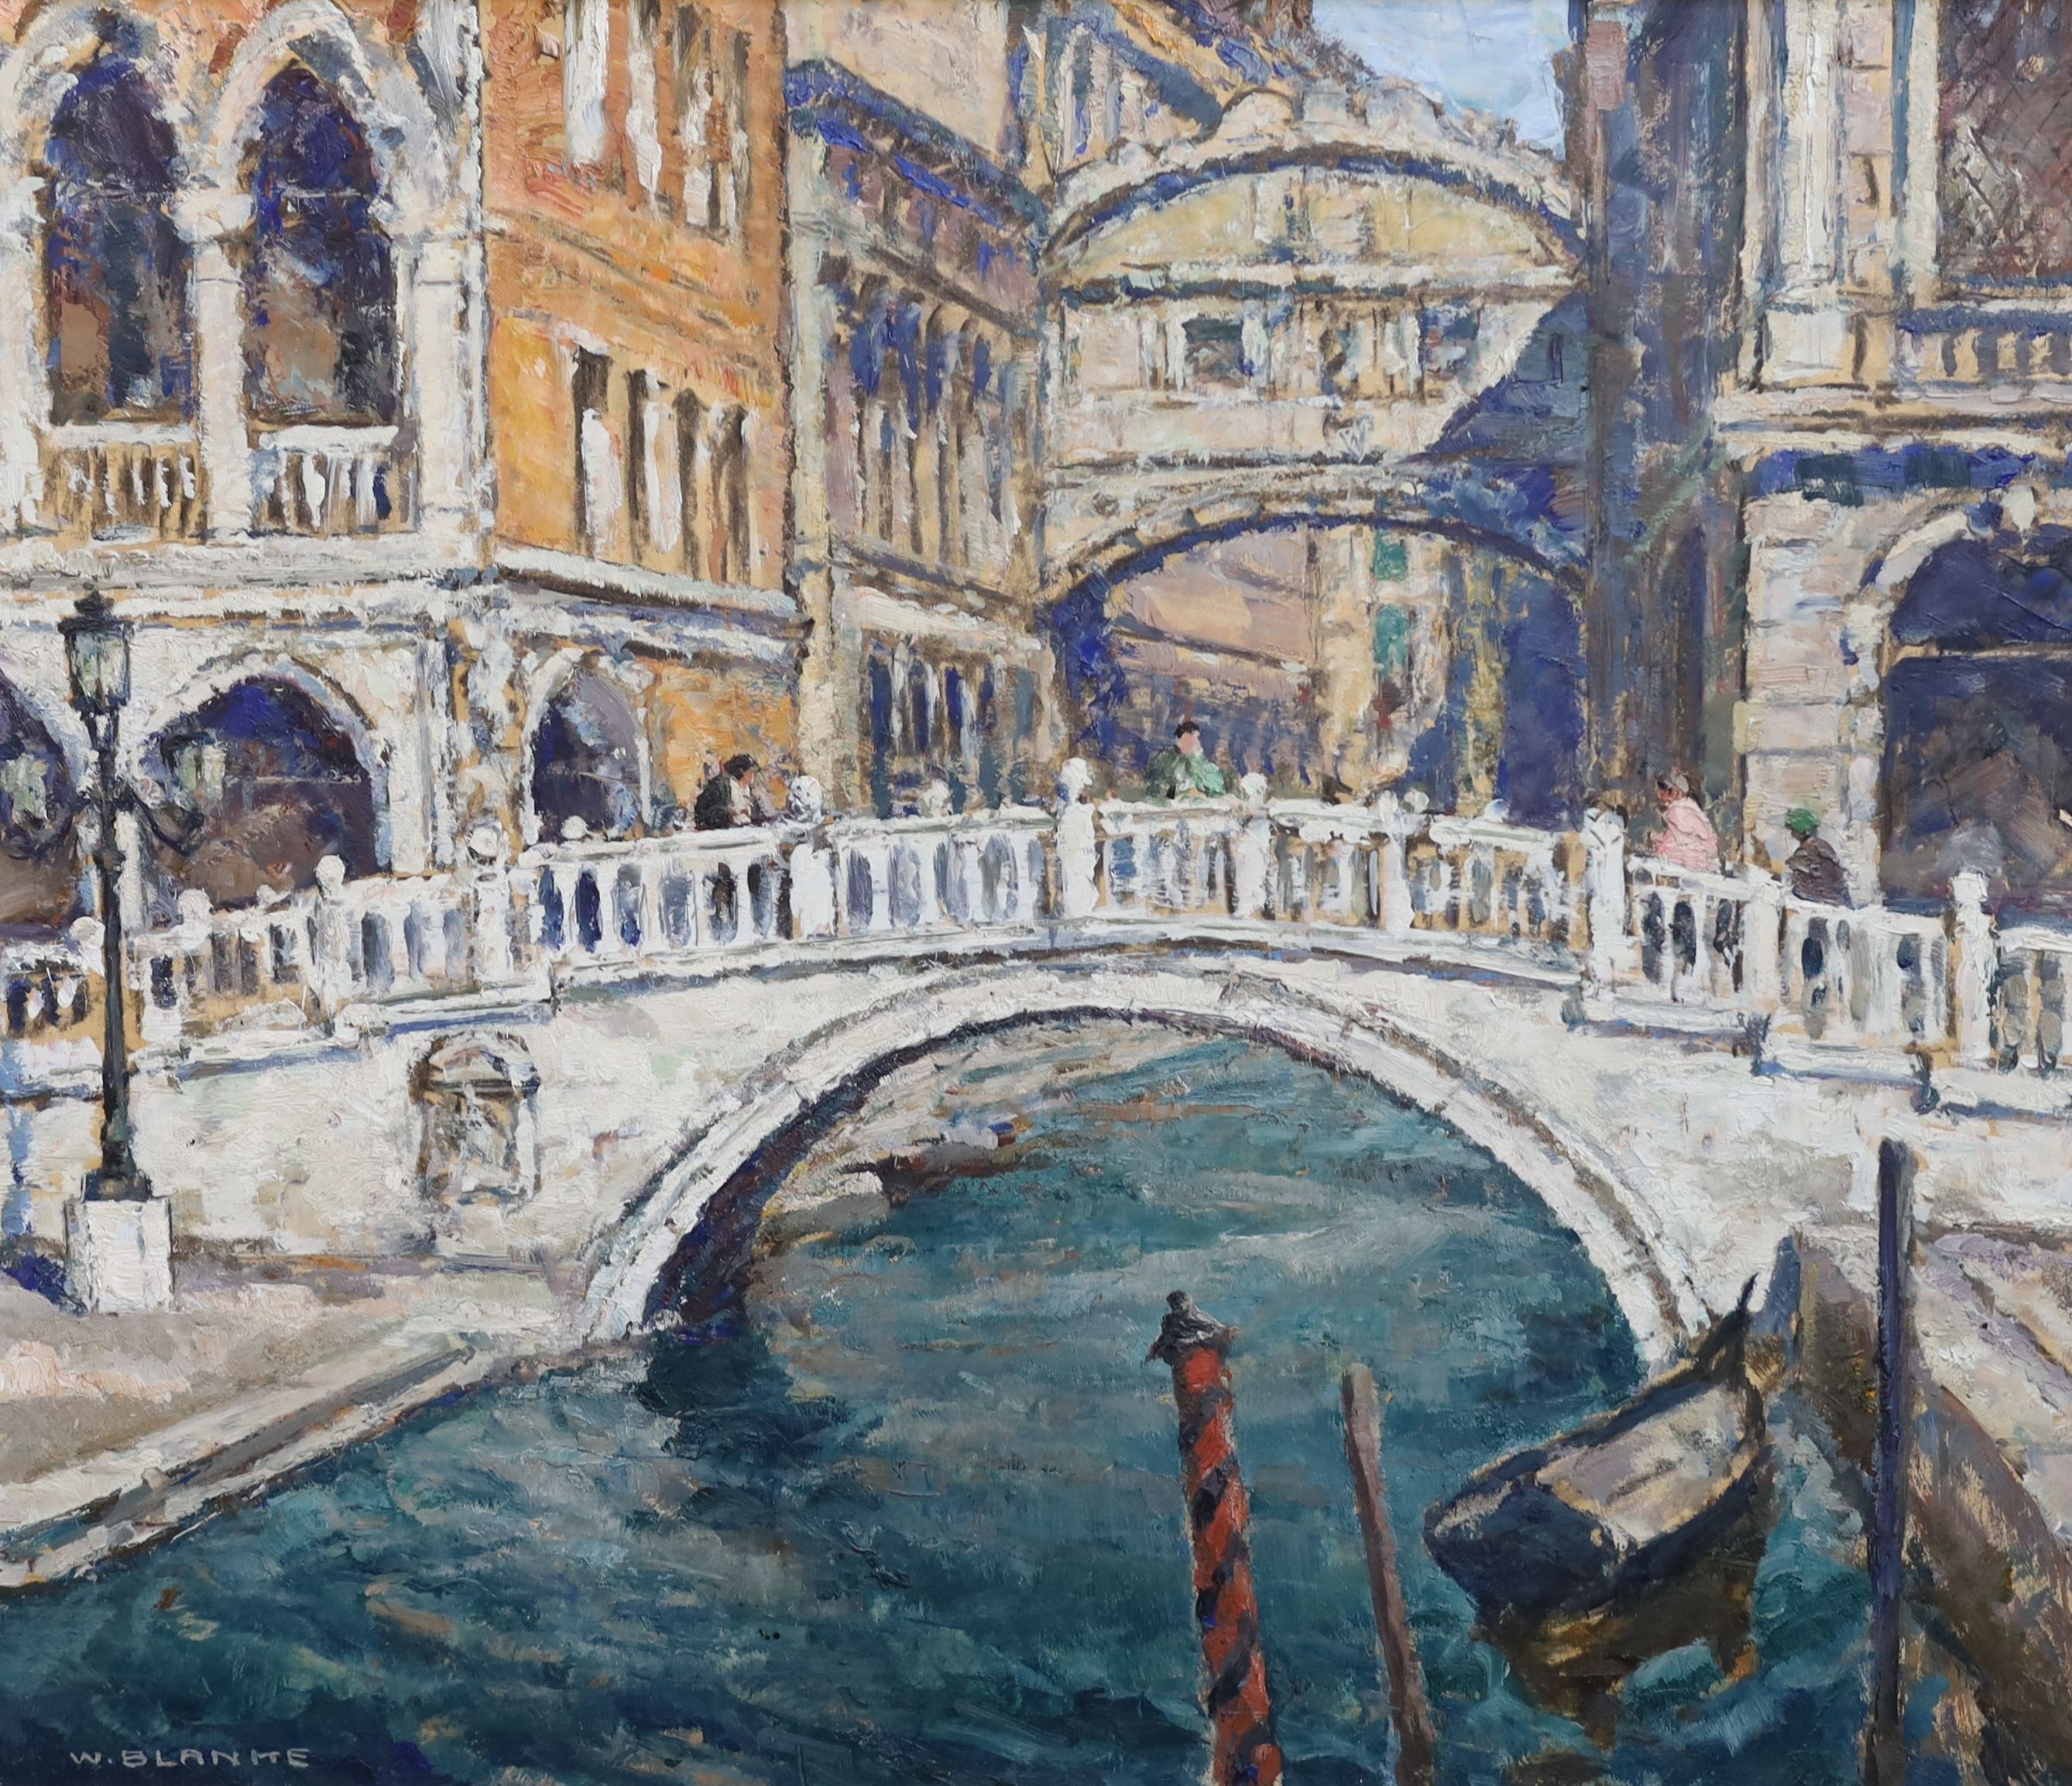 Wilhelm Blanke (German 1873-1943), Venice, the entrance to the Rio di Palazzo, the Bridge of Sighs beyond, oil on board, 58 x 68cm